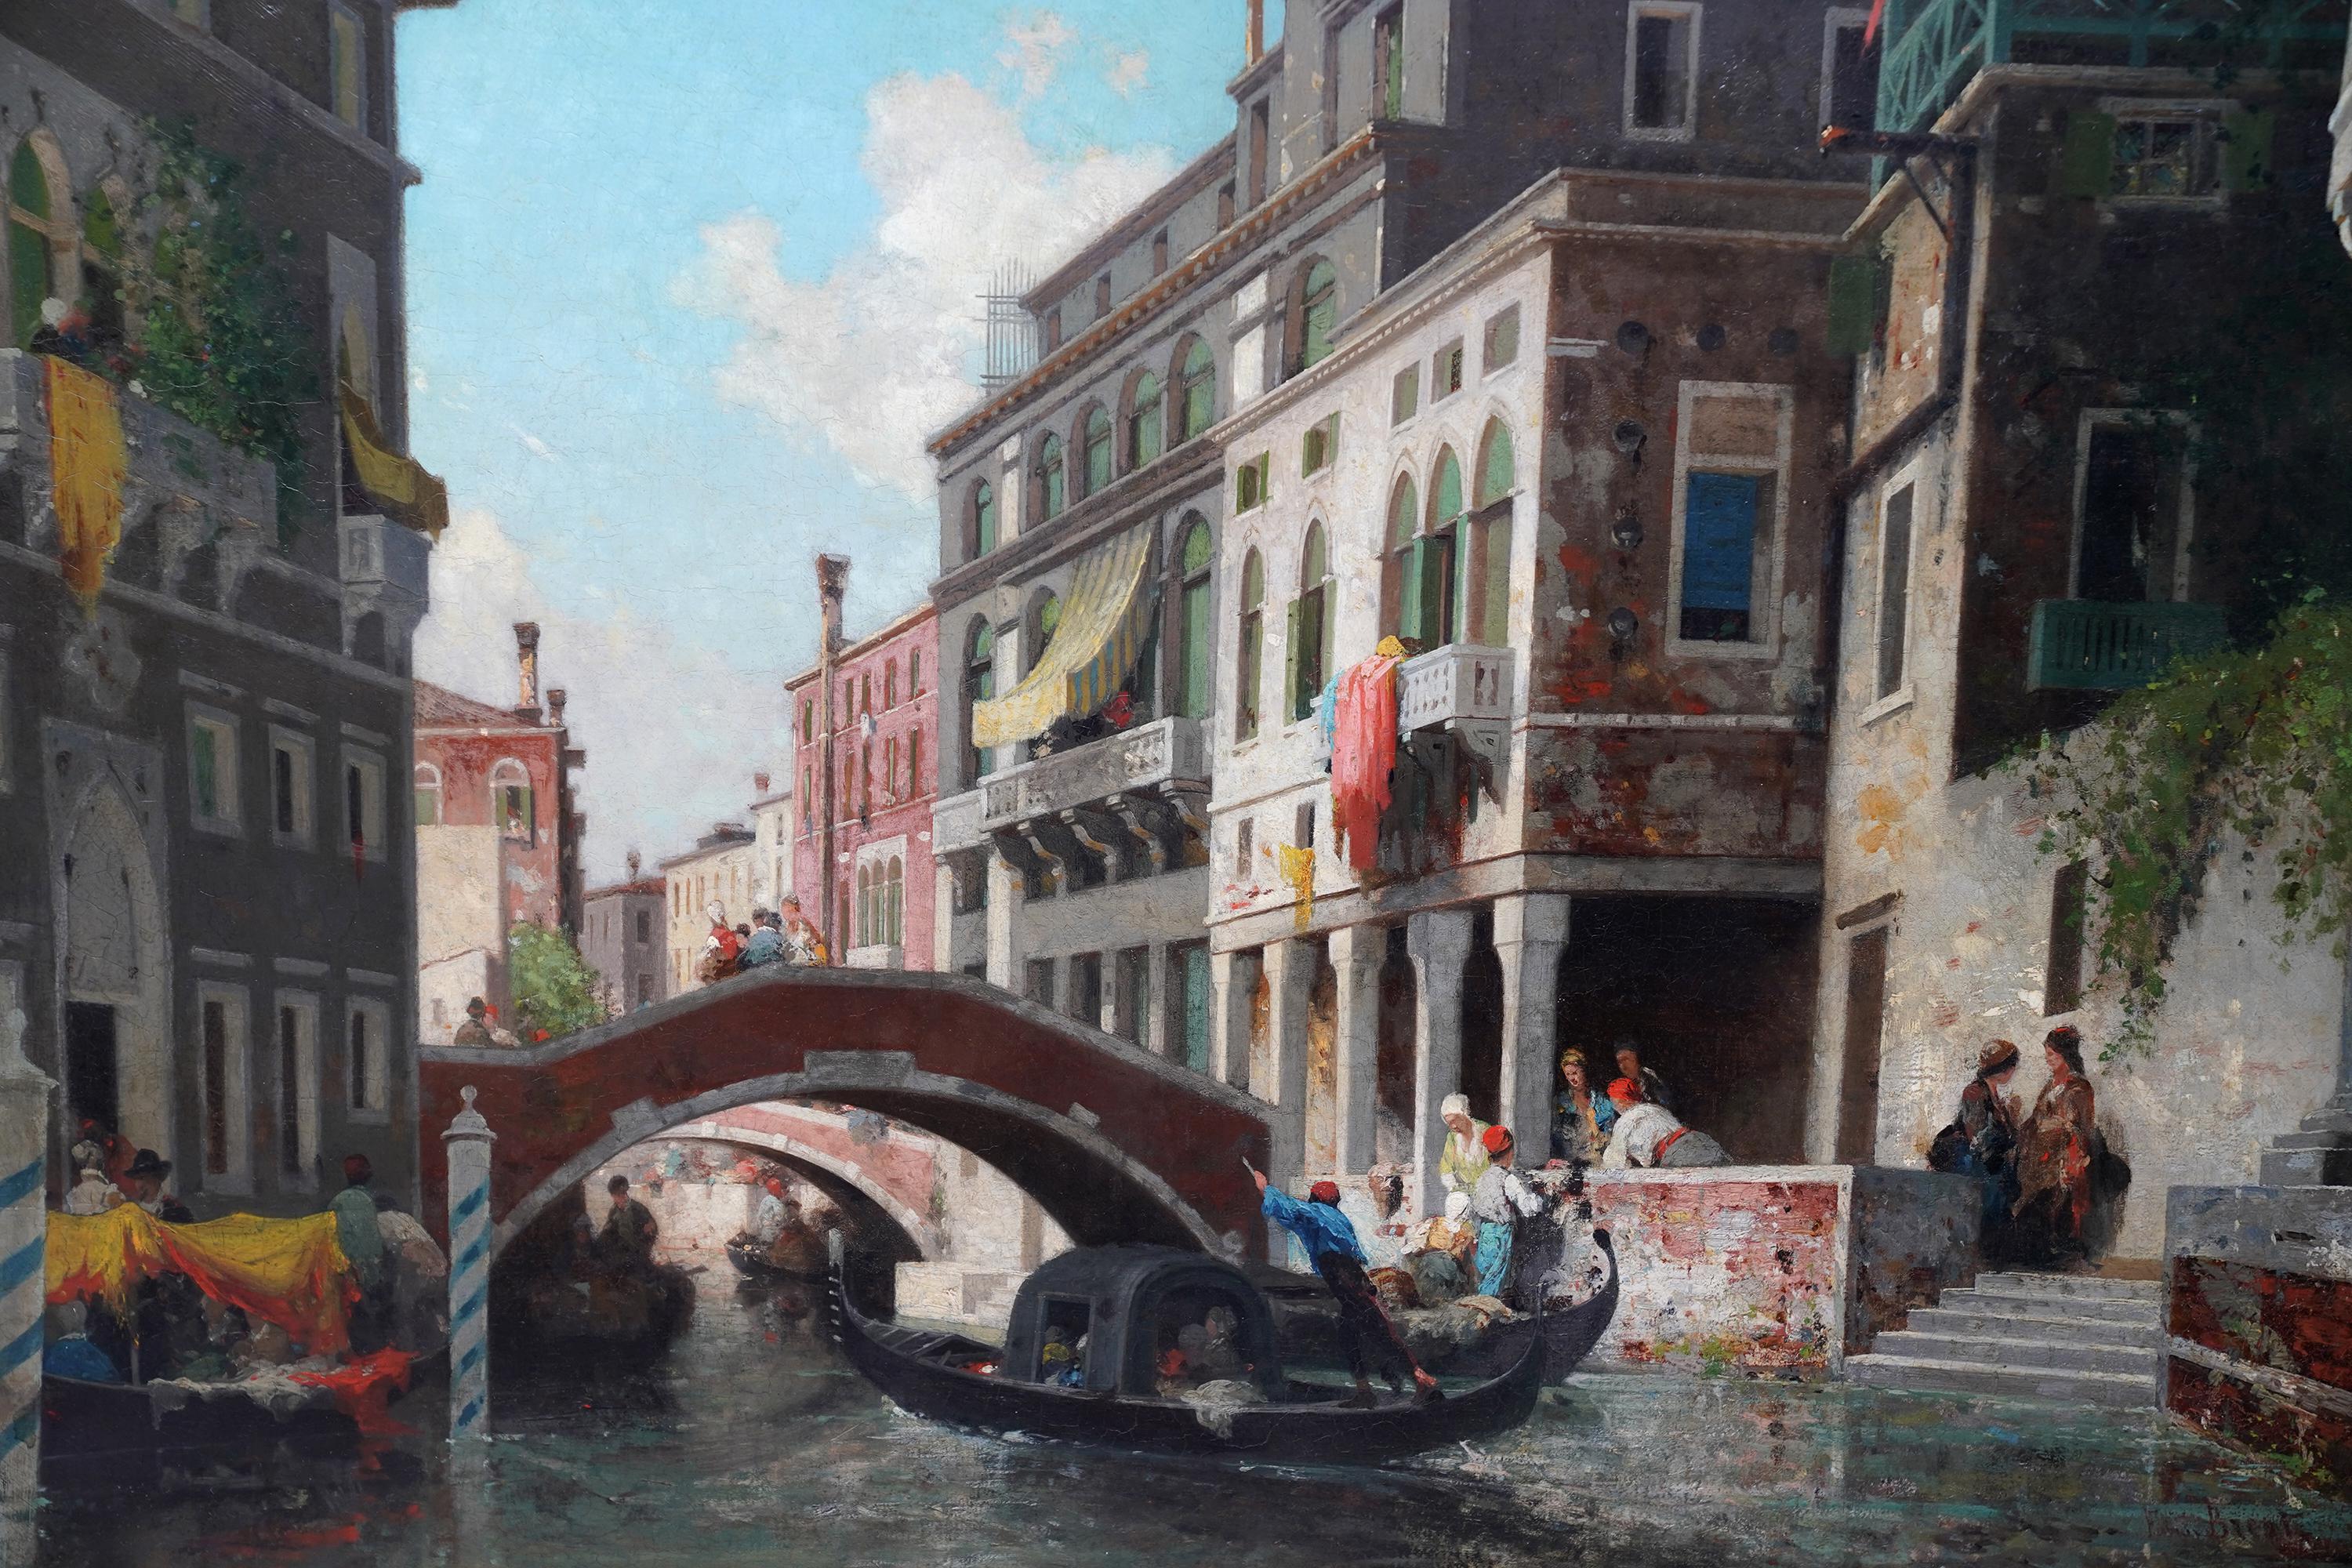 This fabulous vibrant French Victorian Venetian landscape oil painting is by noted artist Germain Fabius Brest. It was painted circa 1865 when Brest was painting classical Venetian scenes where great architecture is populated with vibrant figures.